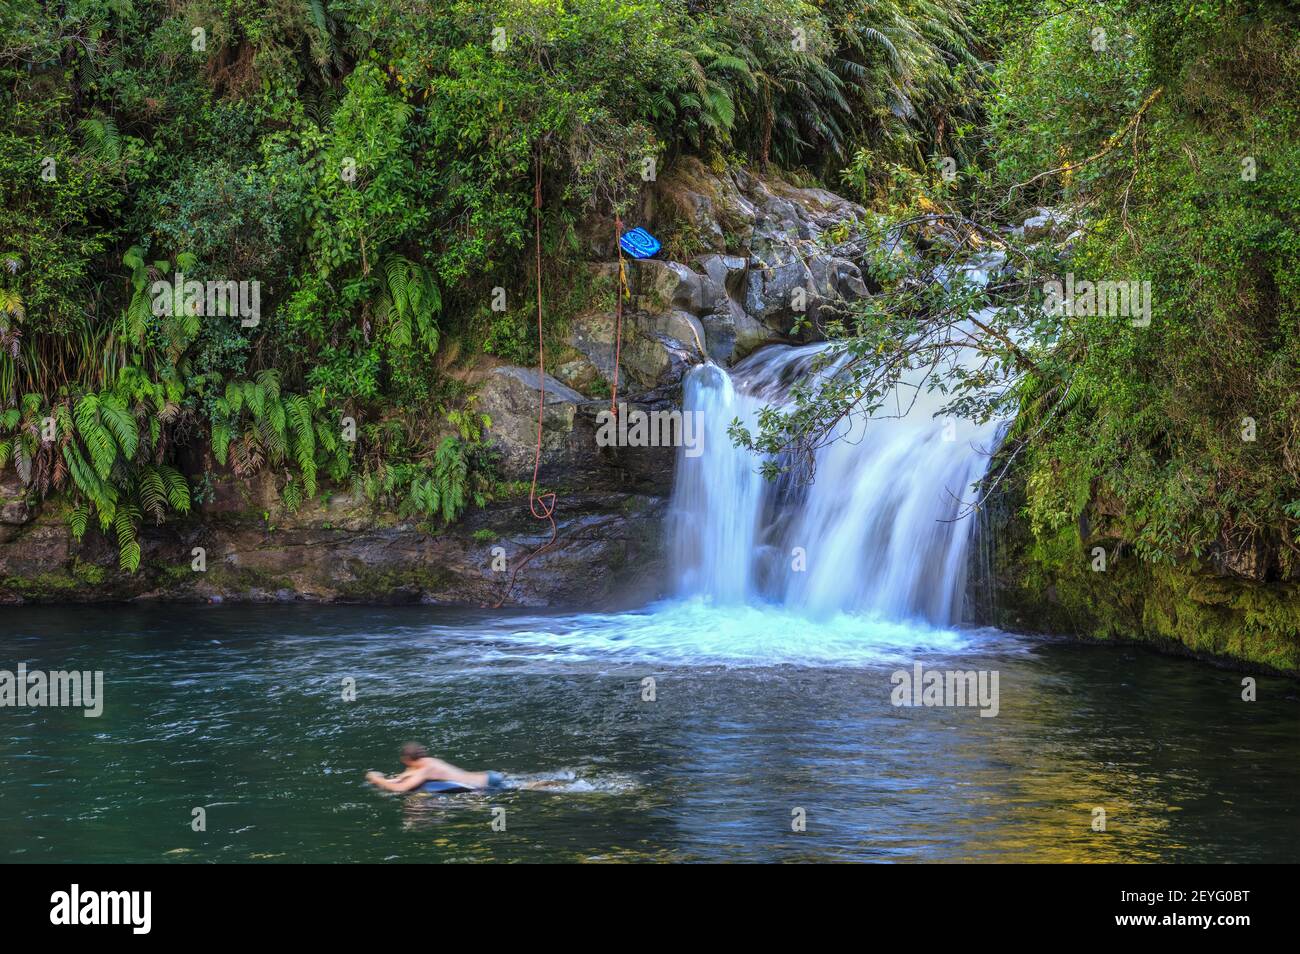 A waterfall in the New Zealand forest, with a swimmer in the pool beneath it. Raparapahoe Falls, Bay of Plenty, NZ Stock Photo